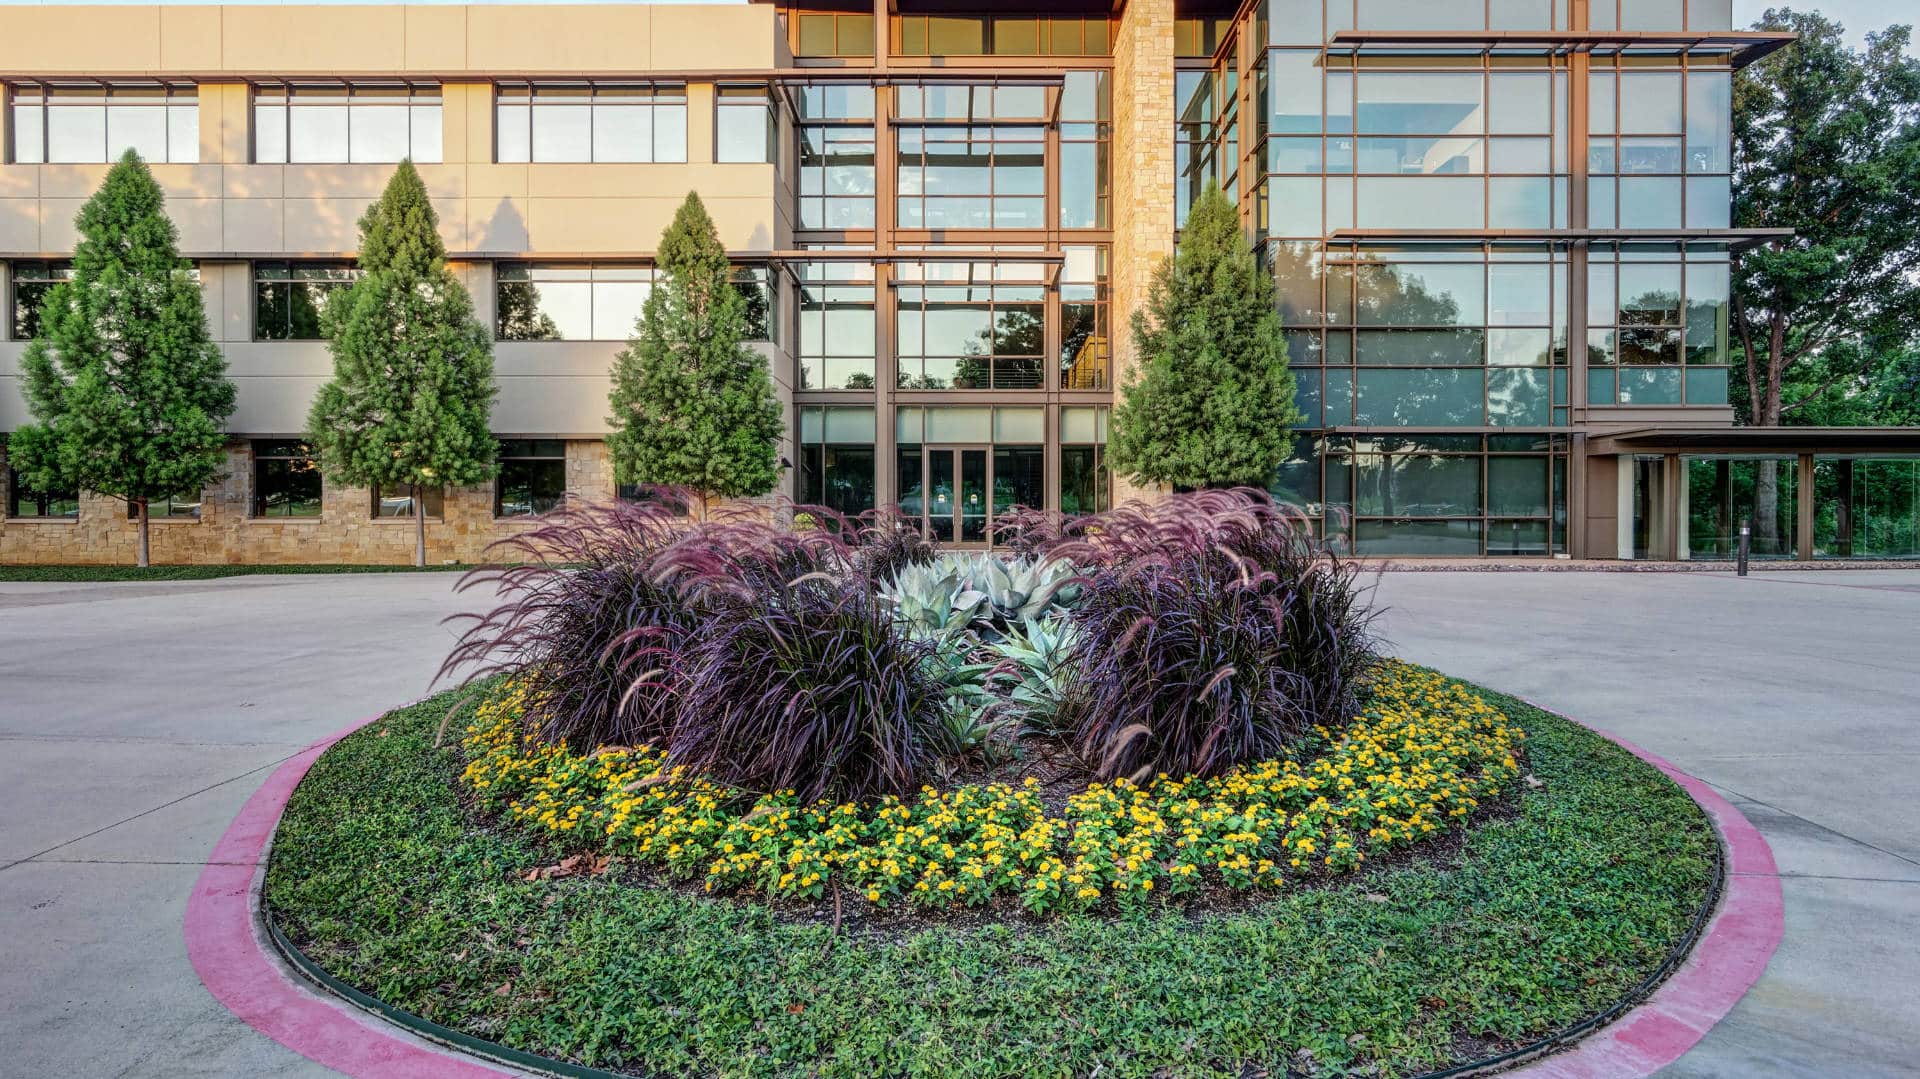 Commercial Landscape Budget Advice from the Pros